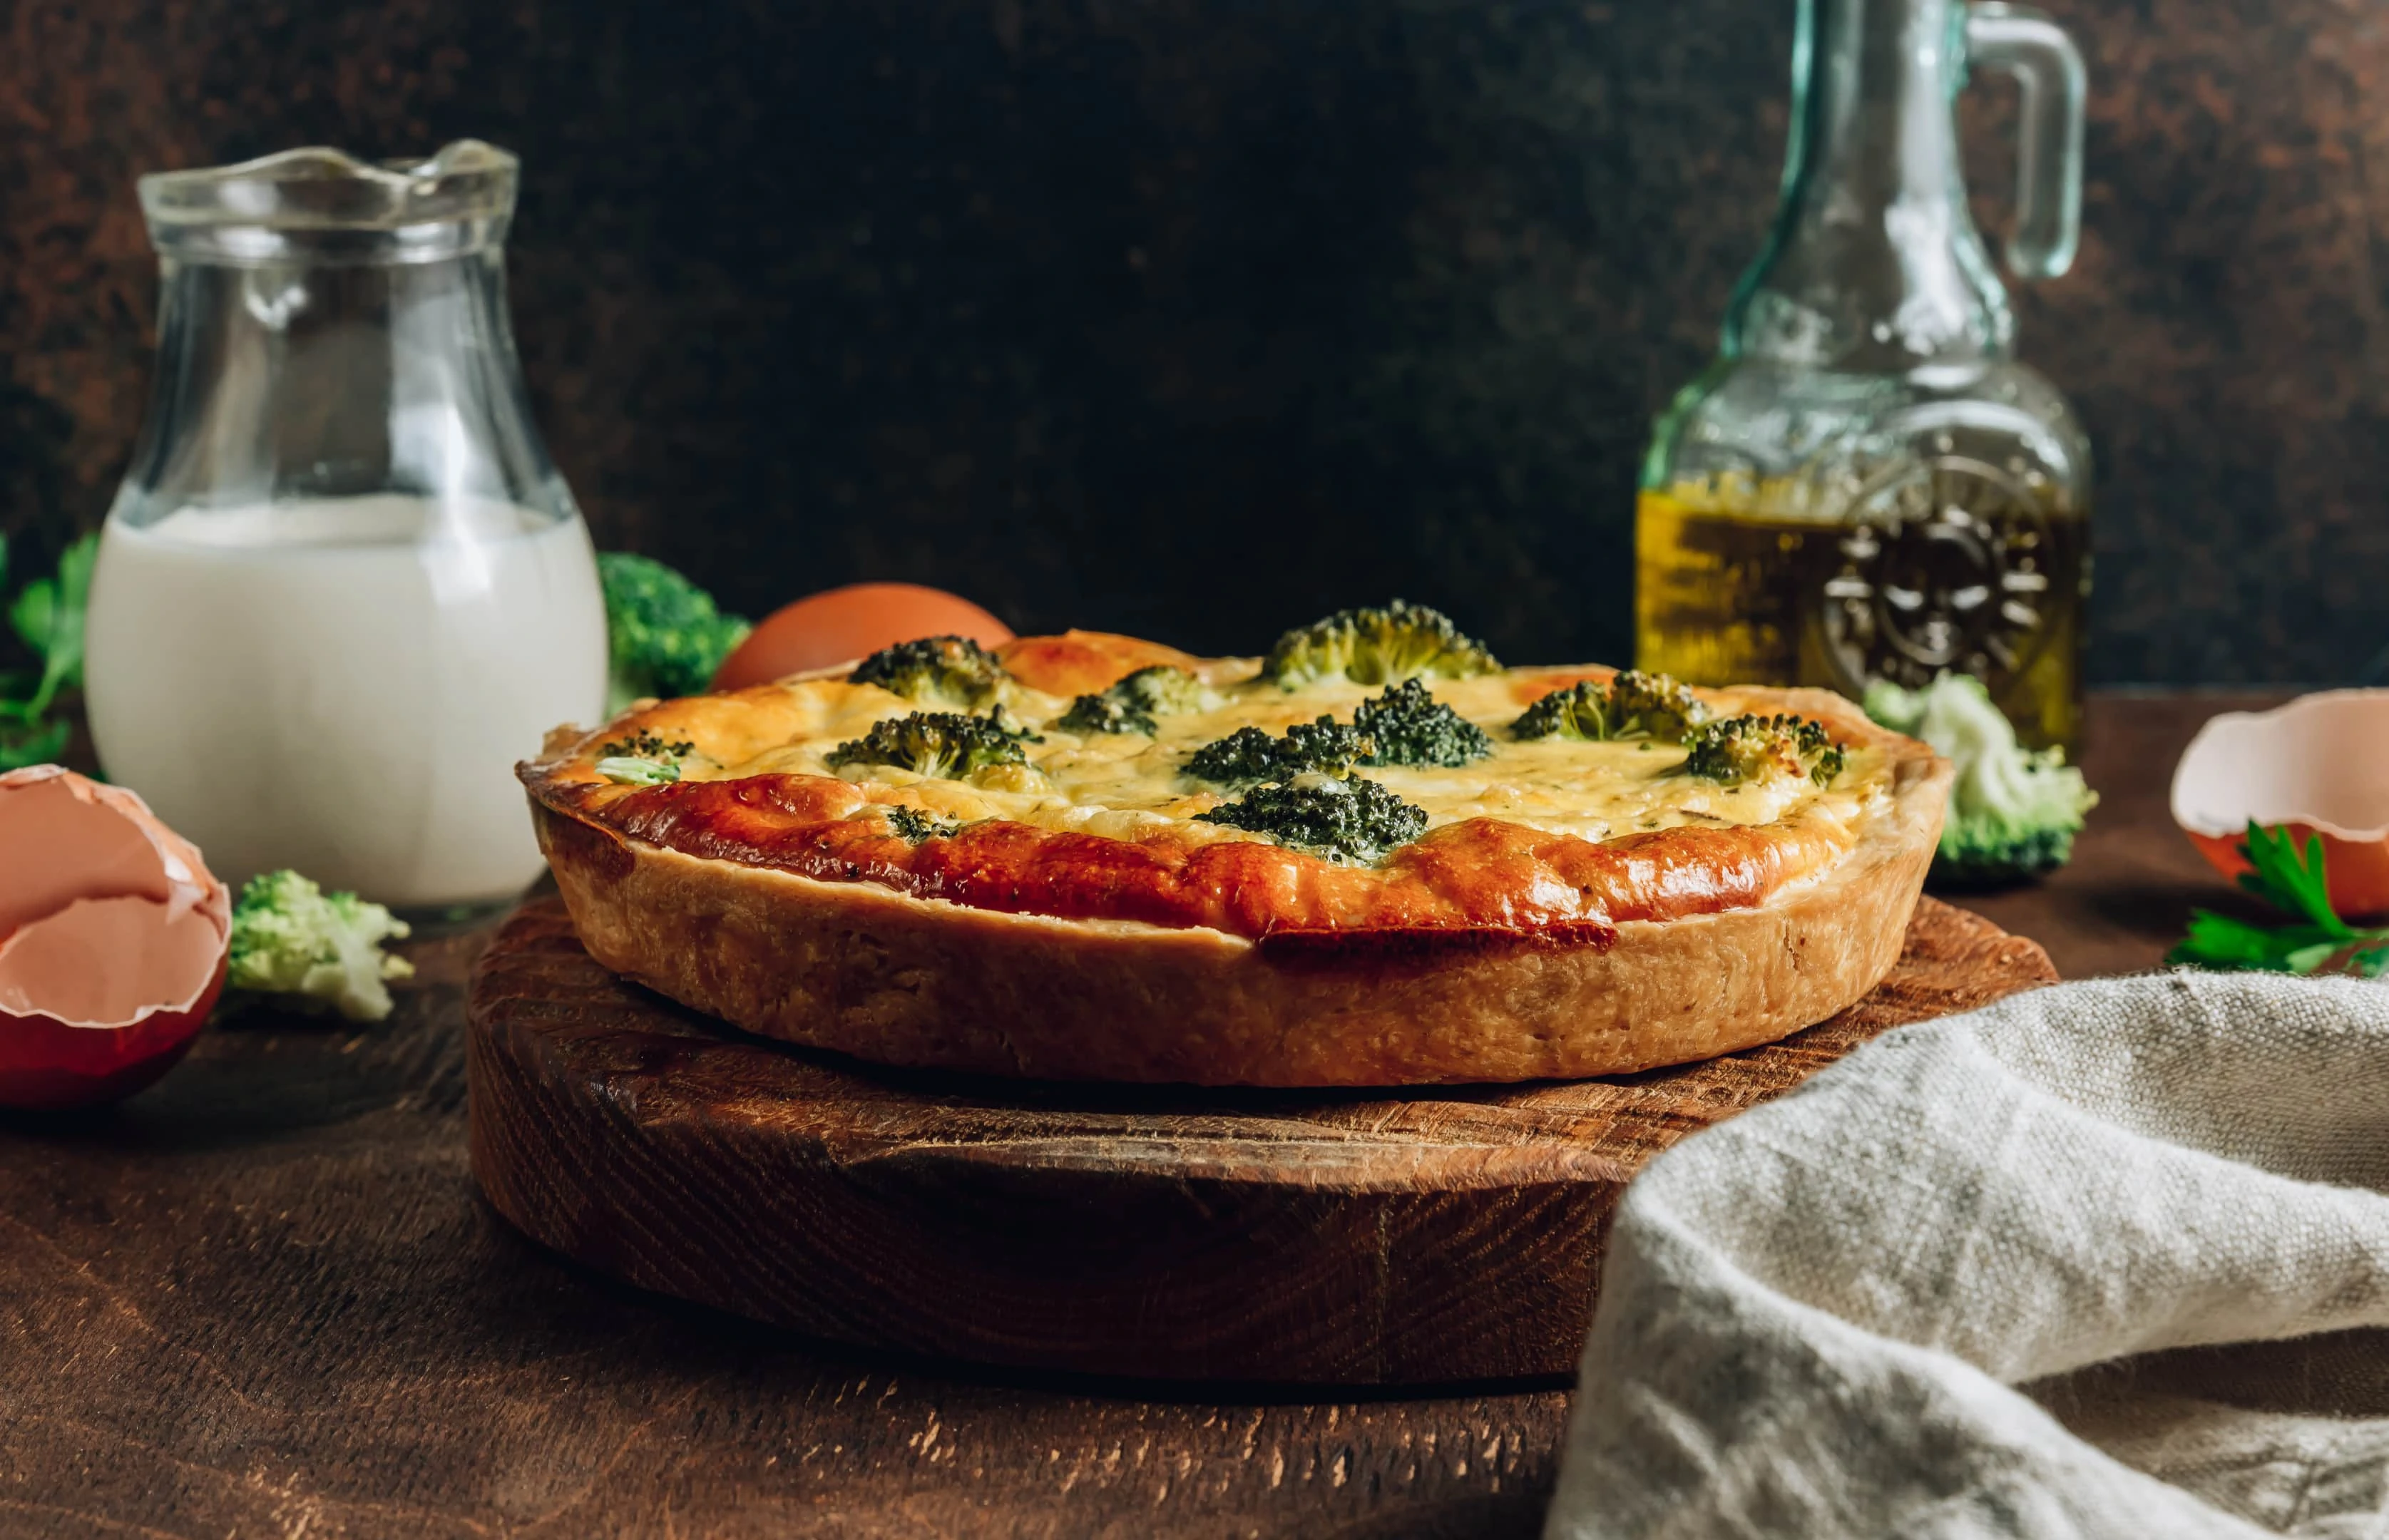 Traditional vegetable quiche with broccoli on wooden board